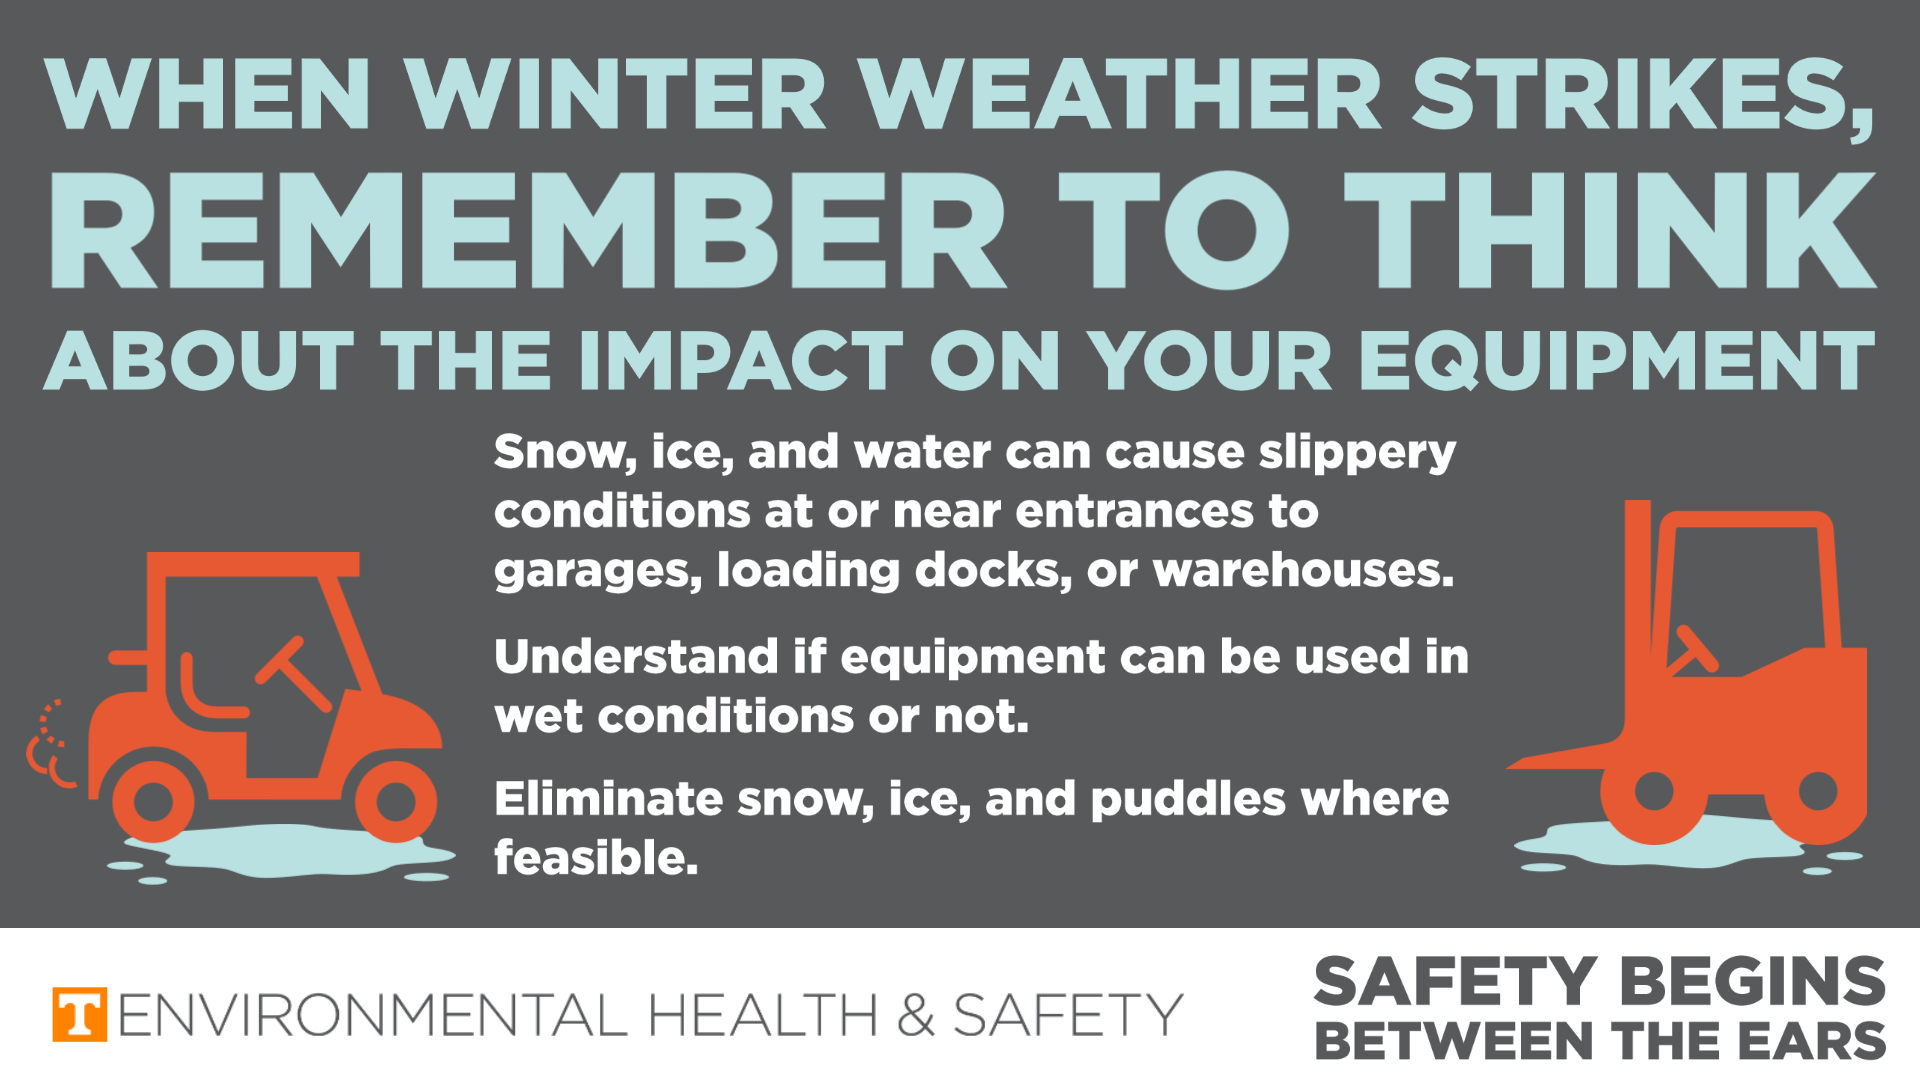 A graphic with equipment golf car and forklift detailing precautions with winter weather and slippery conditions